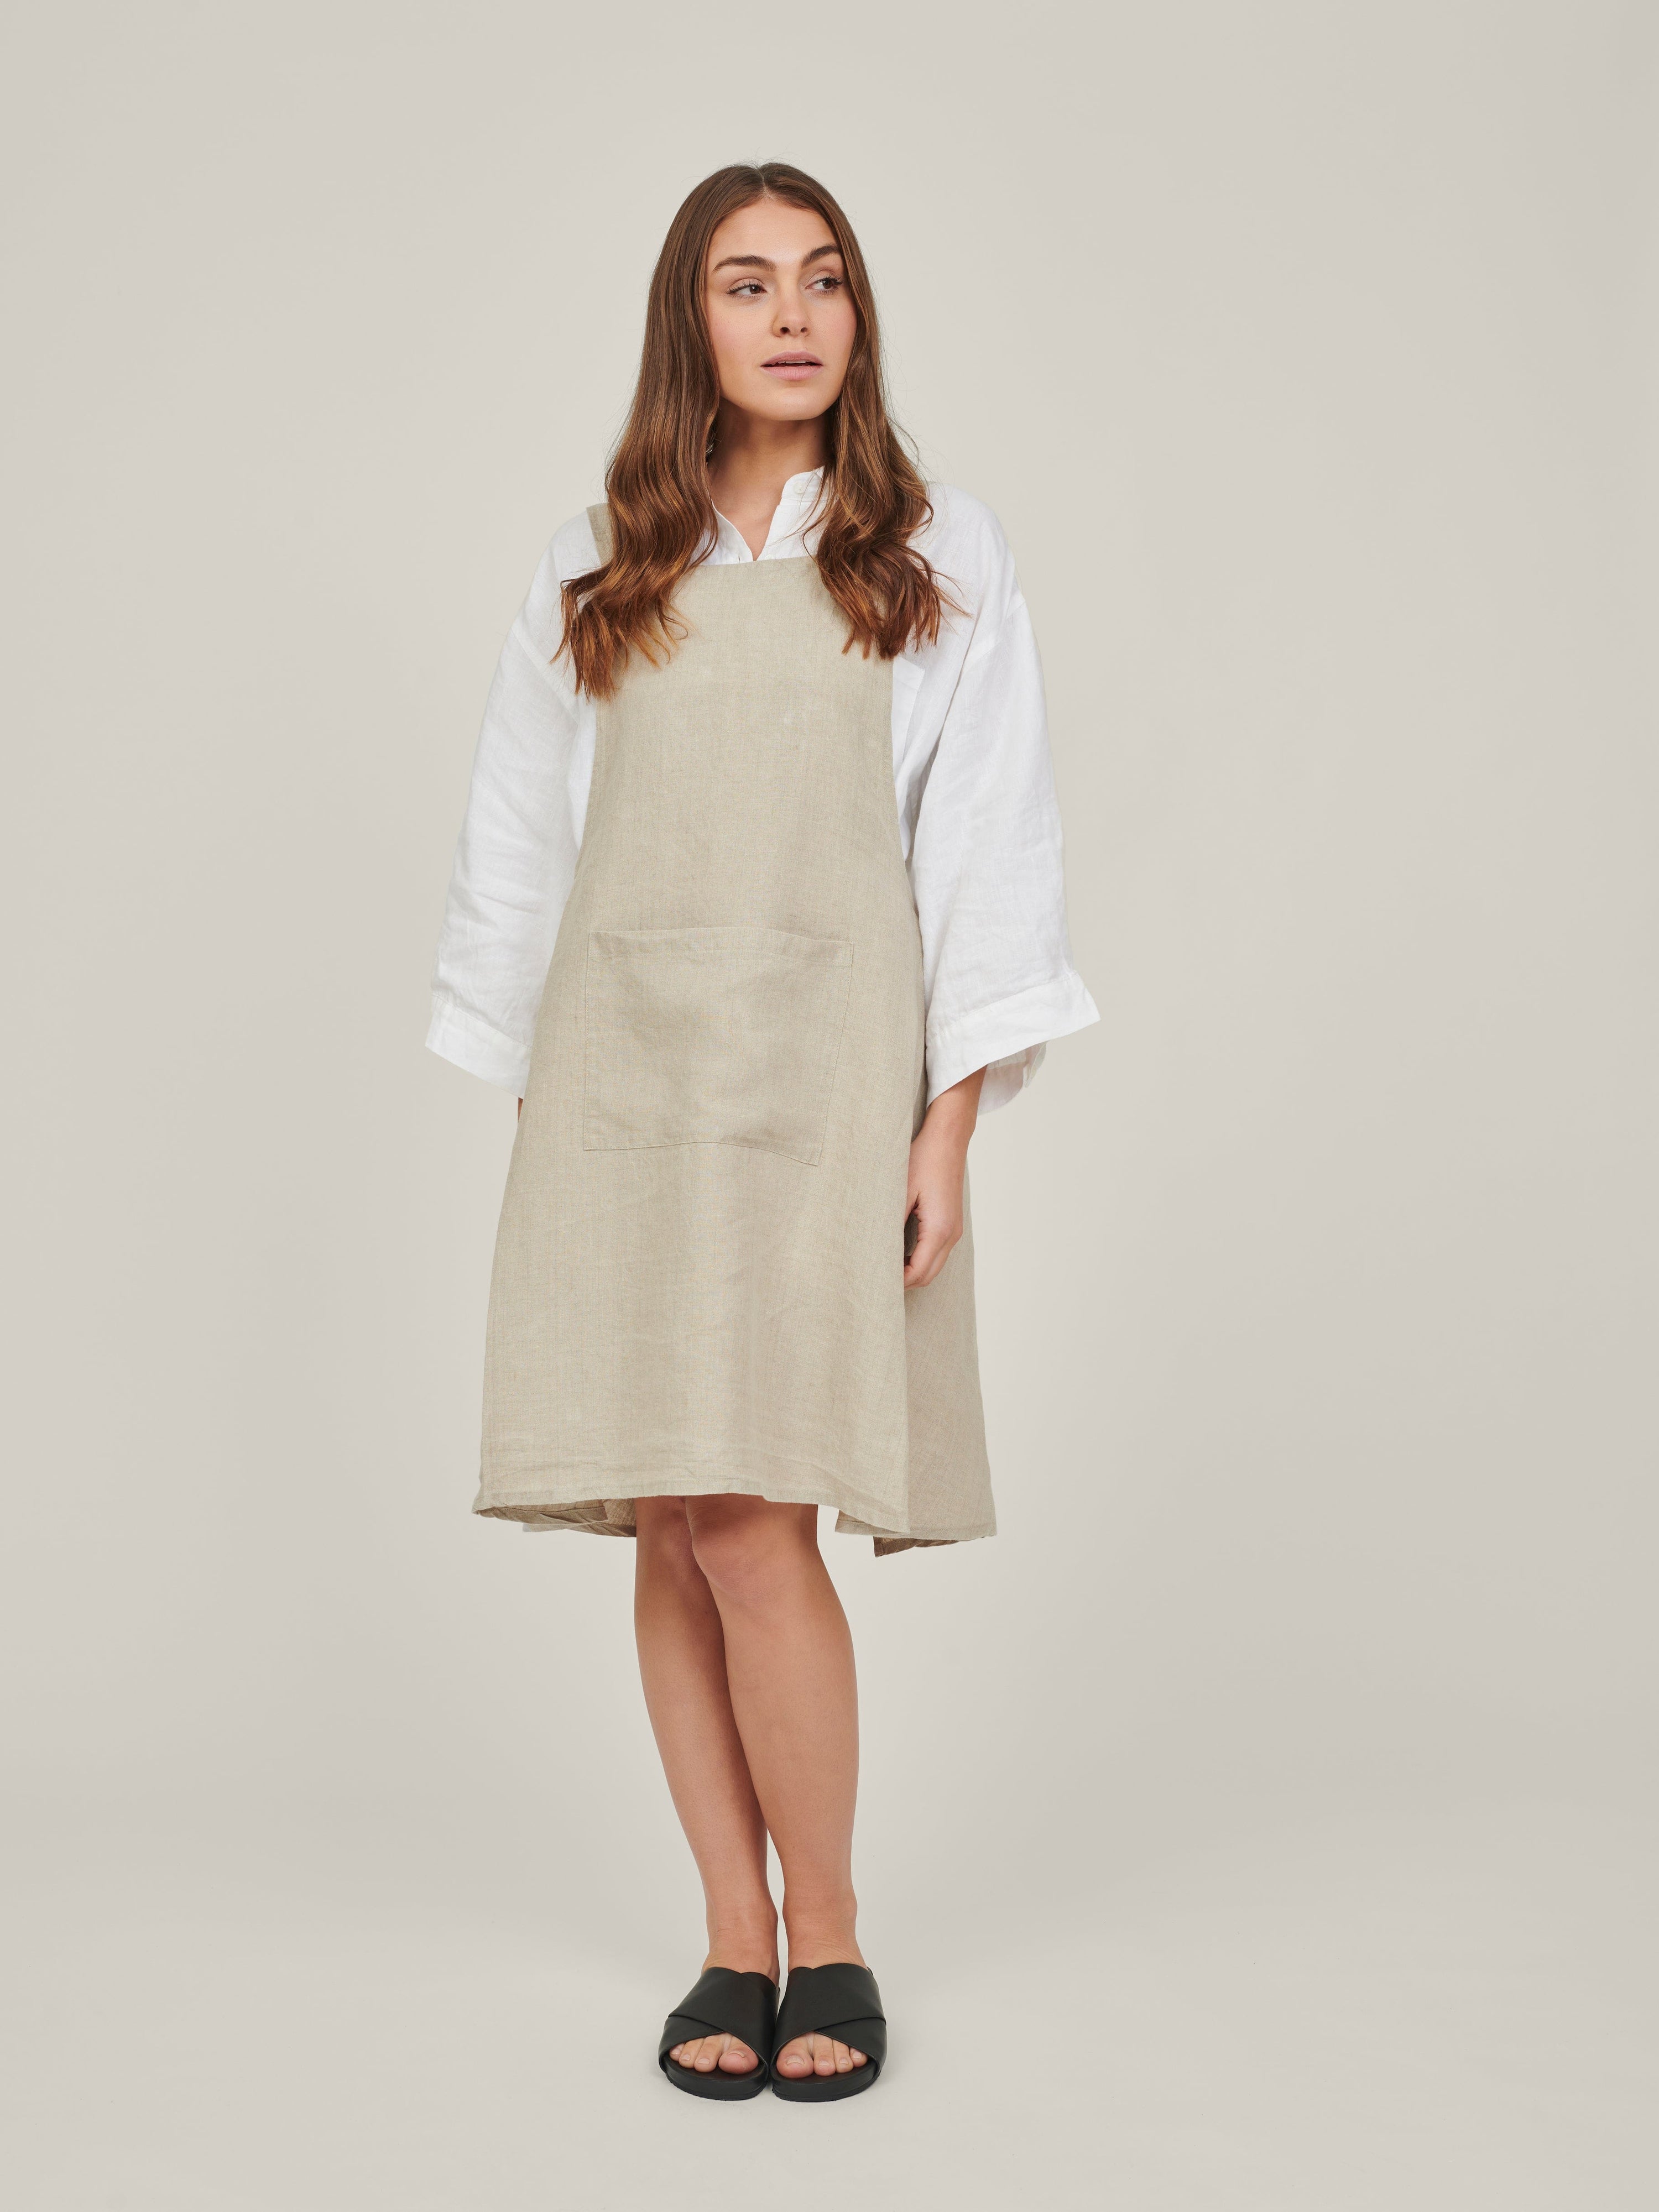 Displays Carlotte and Gee's linen apron in the colour natural, on a model 